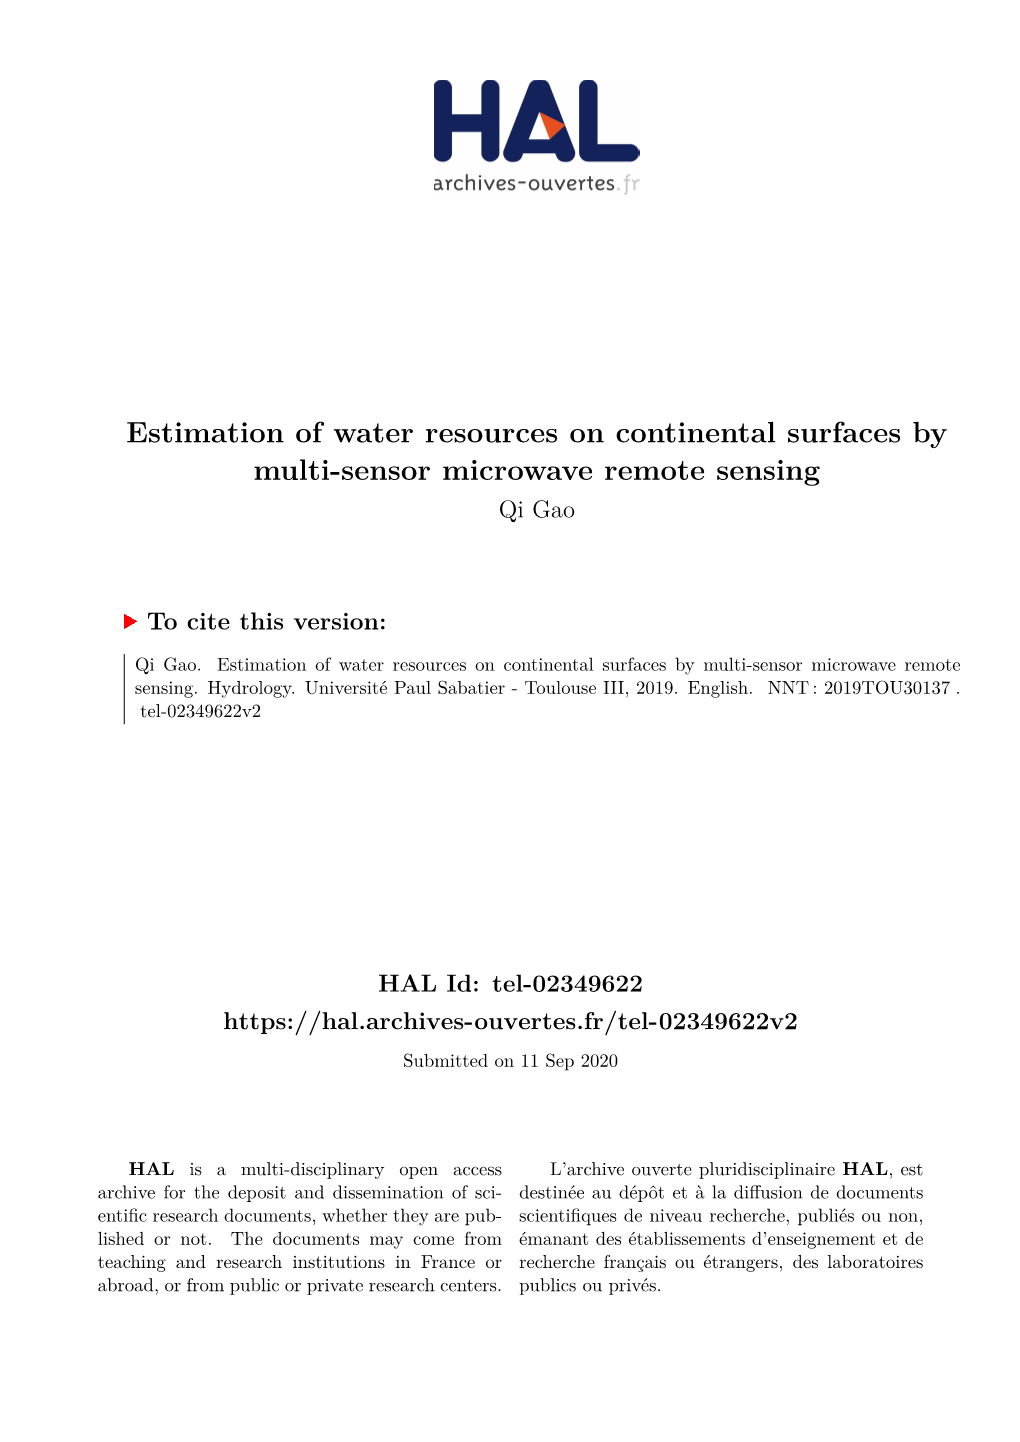 Estimation of Water Resources on Continental Surfaces by Multi-Sensor Microwave Remote Sensing Qi Gao